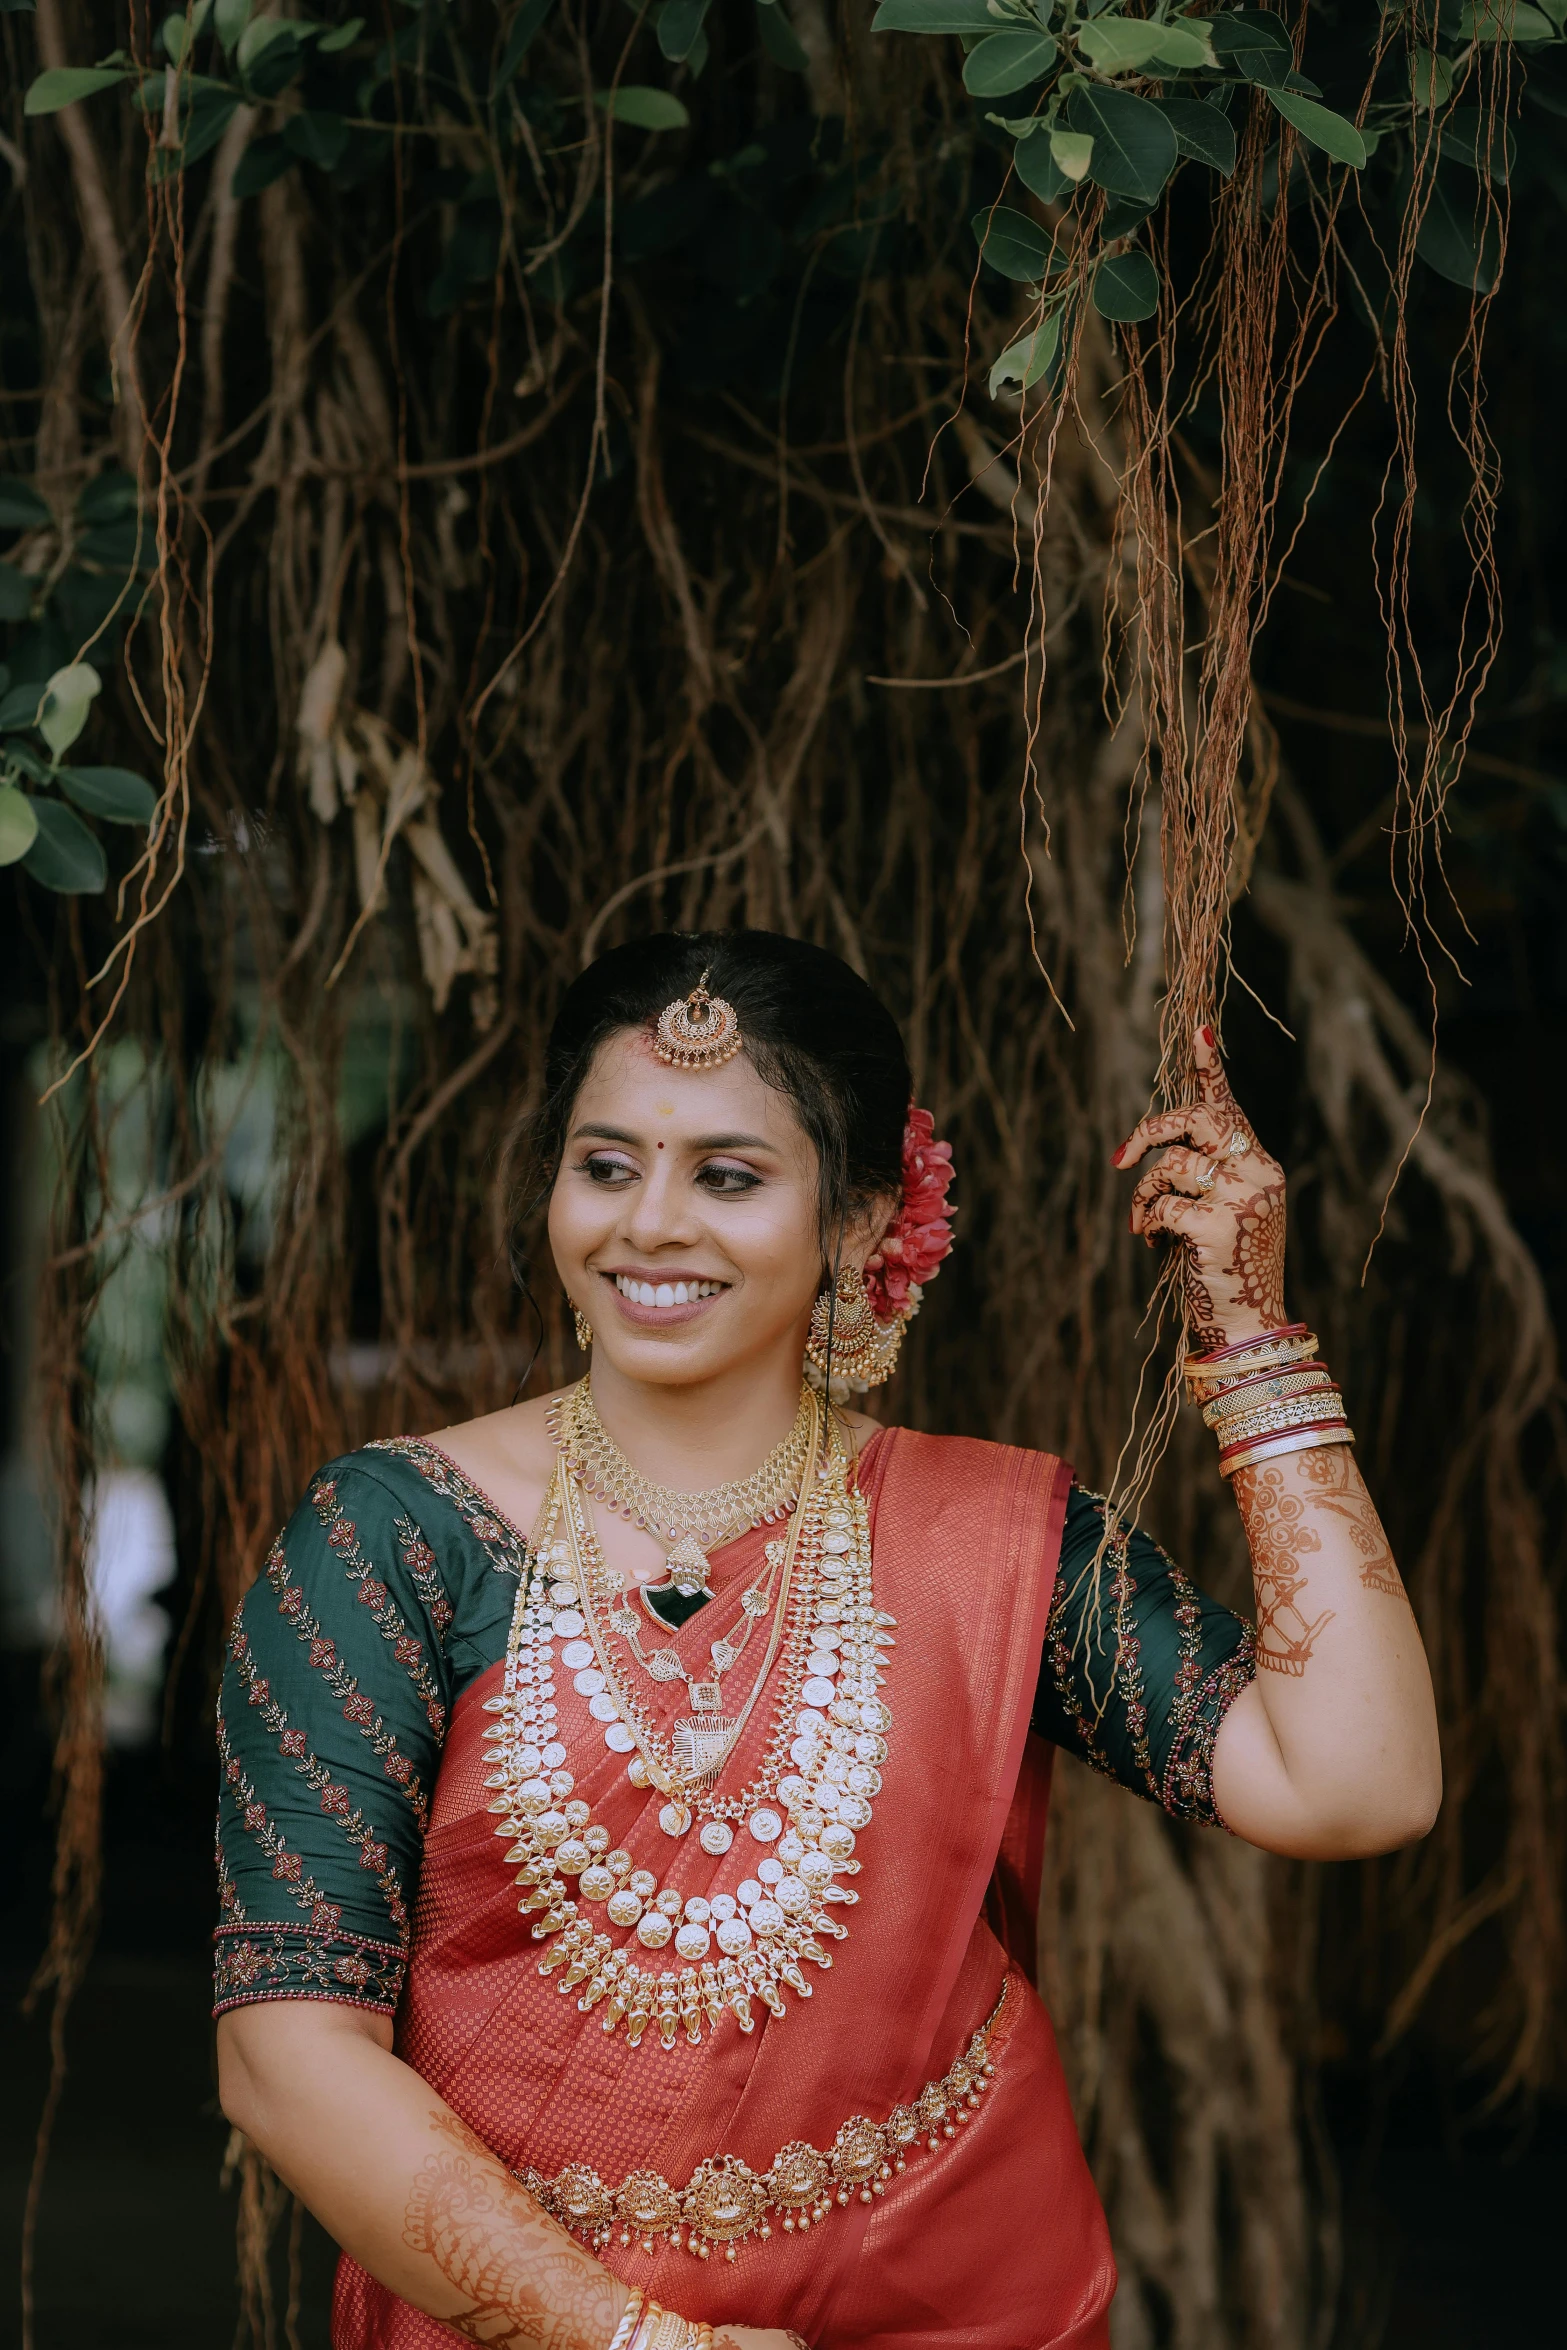 the woman is smiling and wearing an ethnic indian outfit